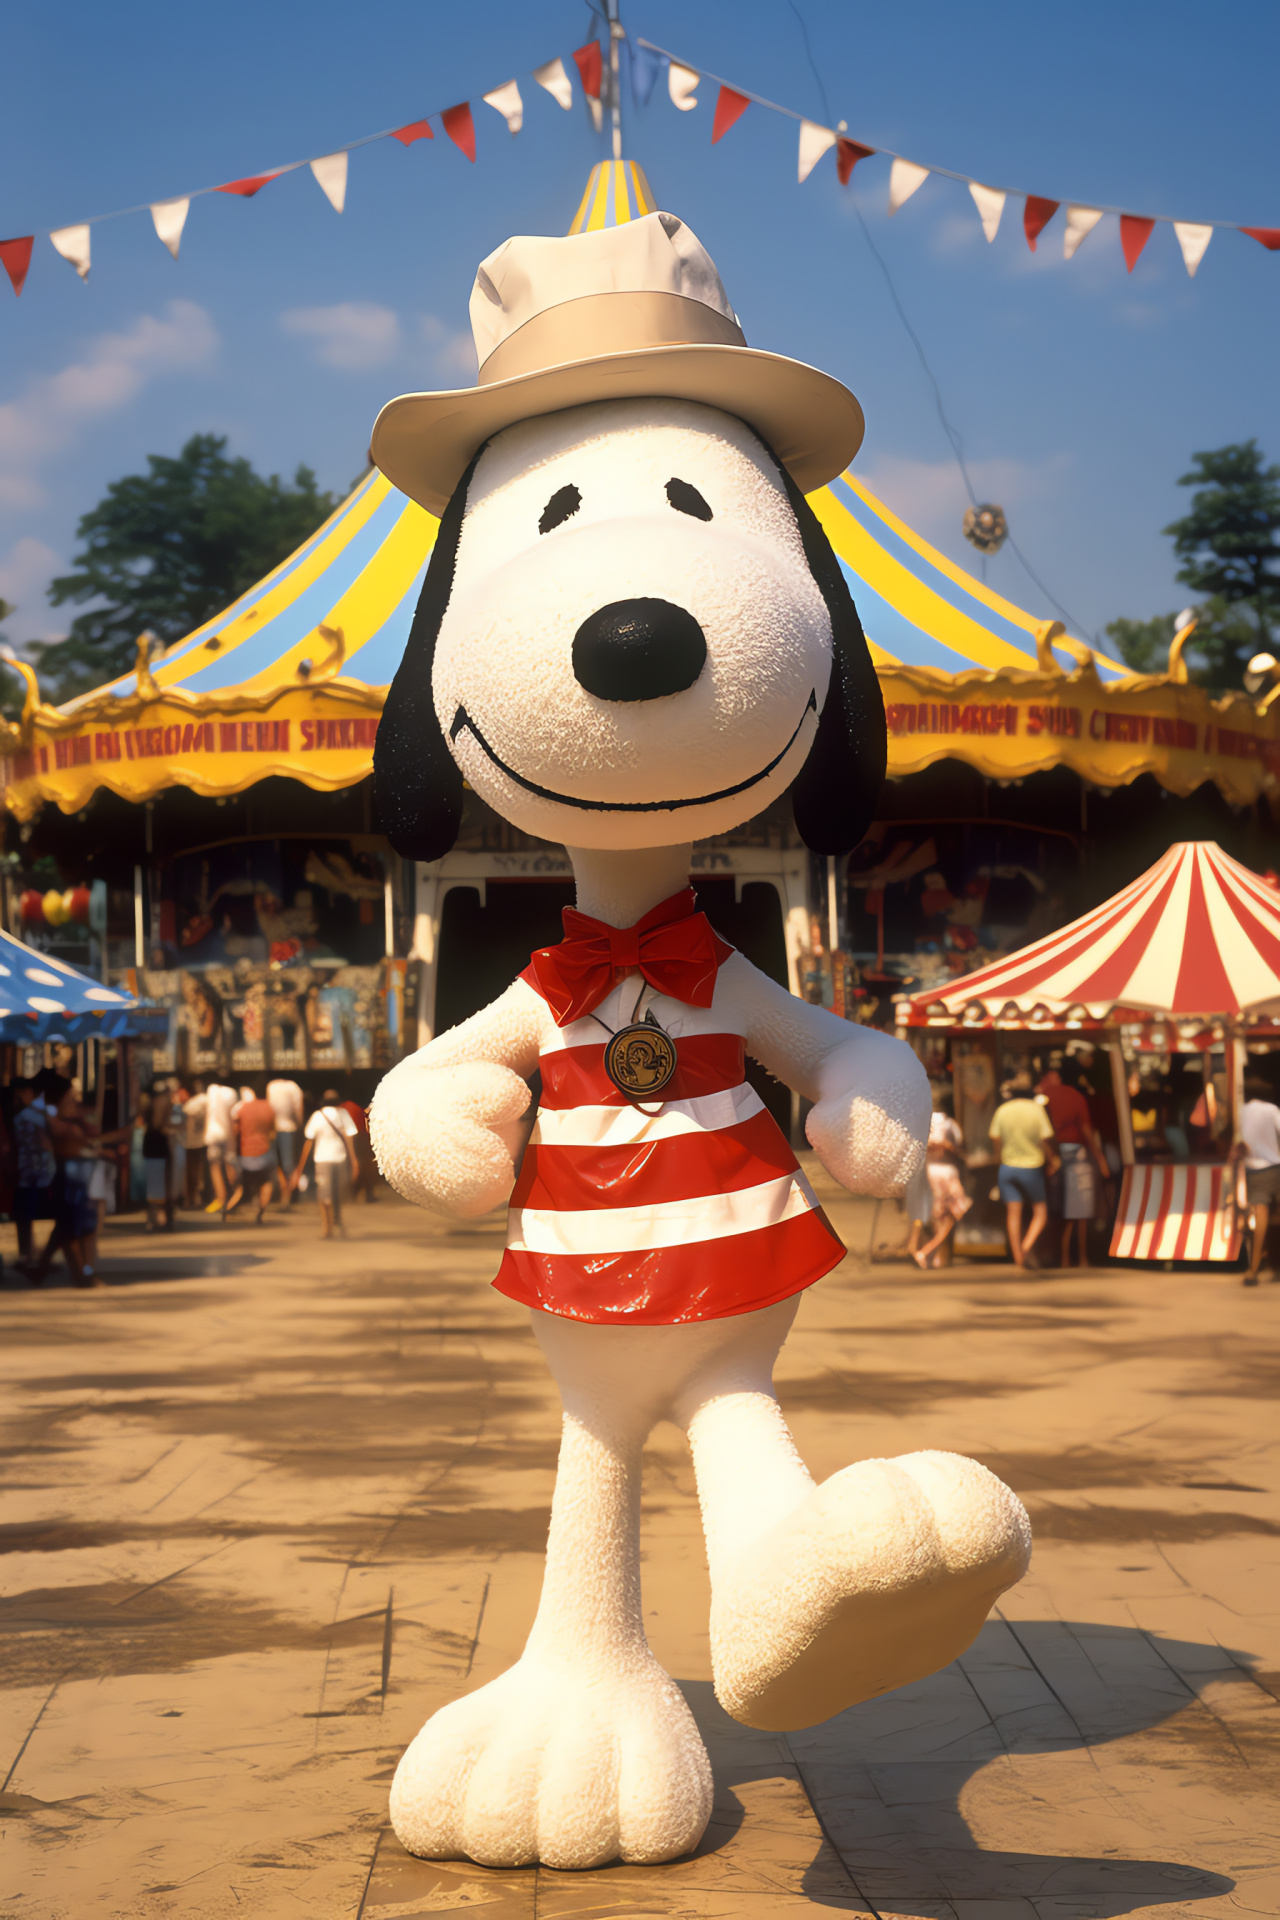 Snoopy holiday celebration, Woodstock friendship, Independence Day festivities, local carnival, amusement stalls, HD Phone Image